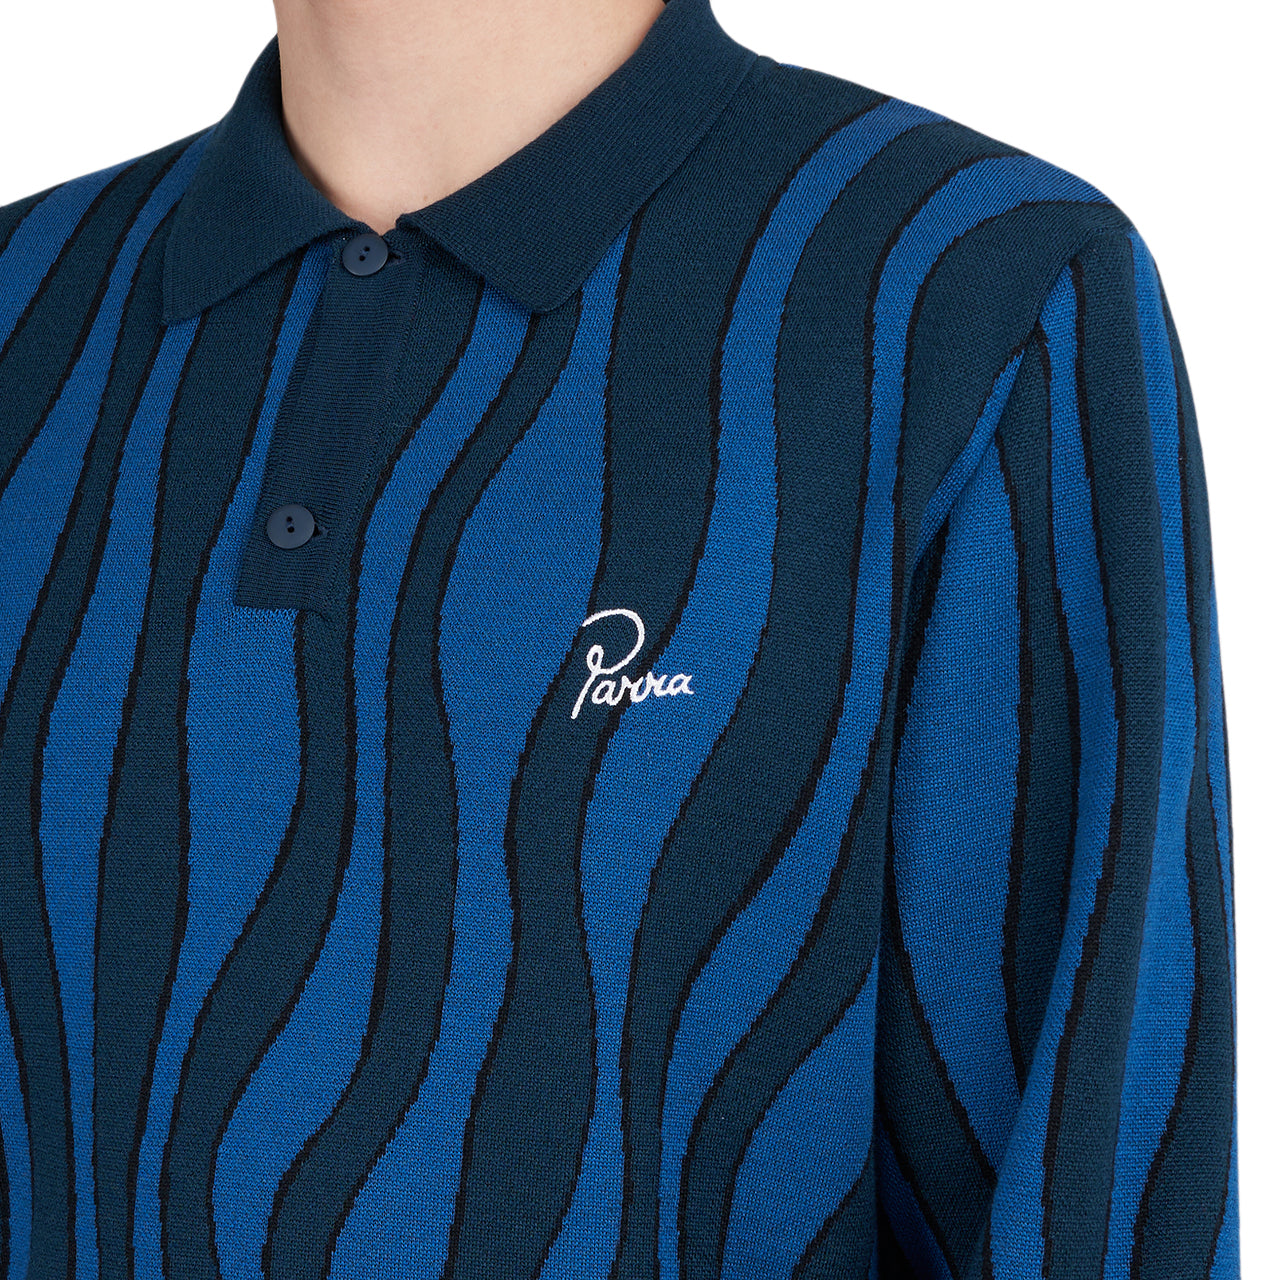 by Parra Aqua Weed Waves Knitted Polo Shirt (Multi)  - Allike Store